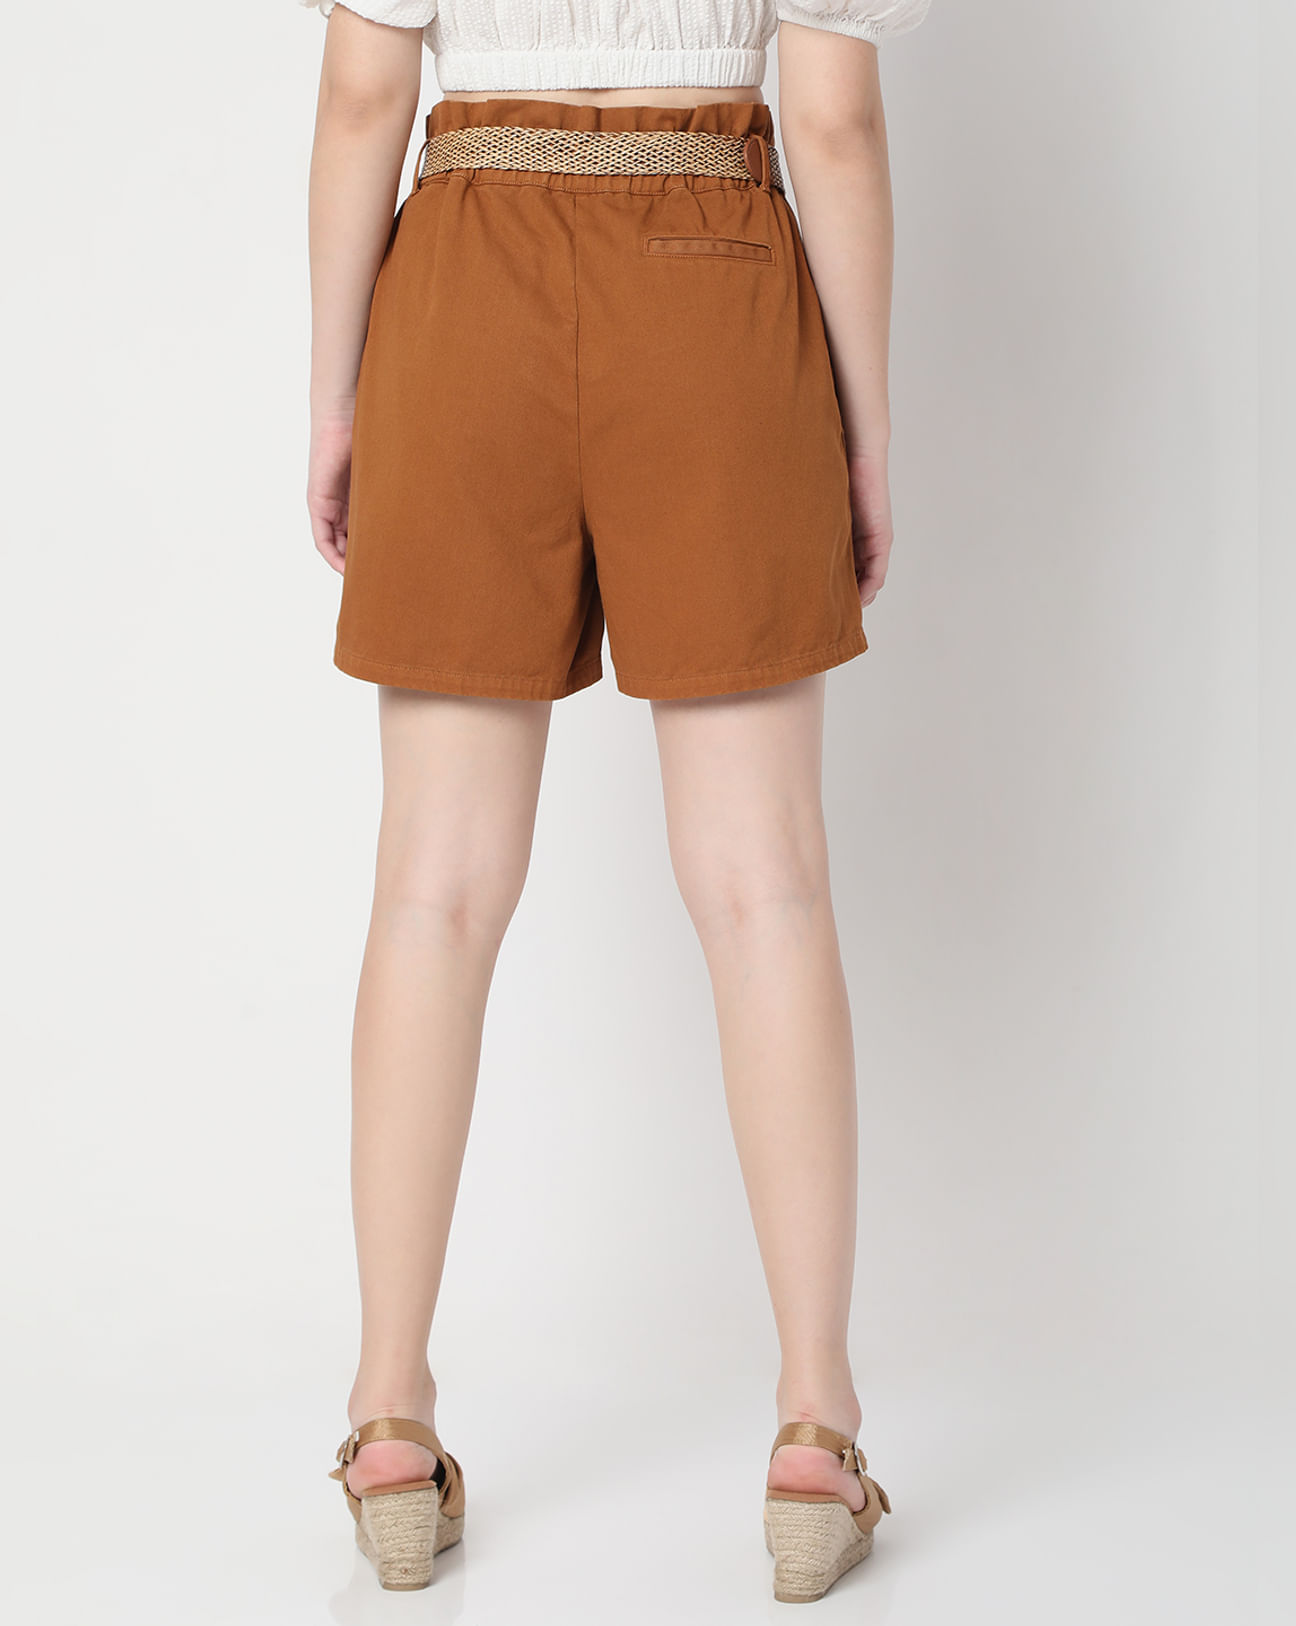 Thigh Length Ladies Cotton Shorts, Size: M-xxl at Rs 200/piece in